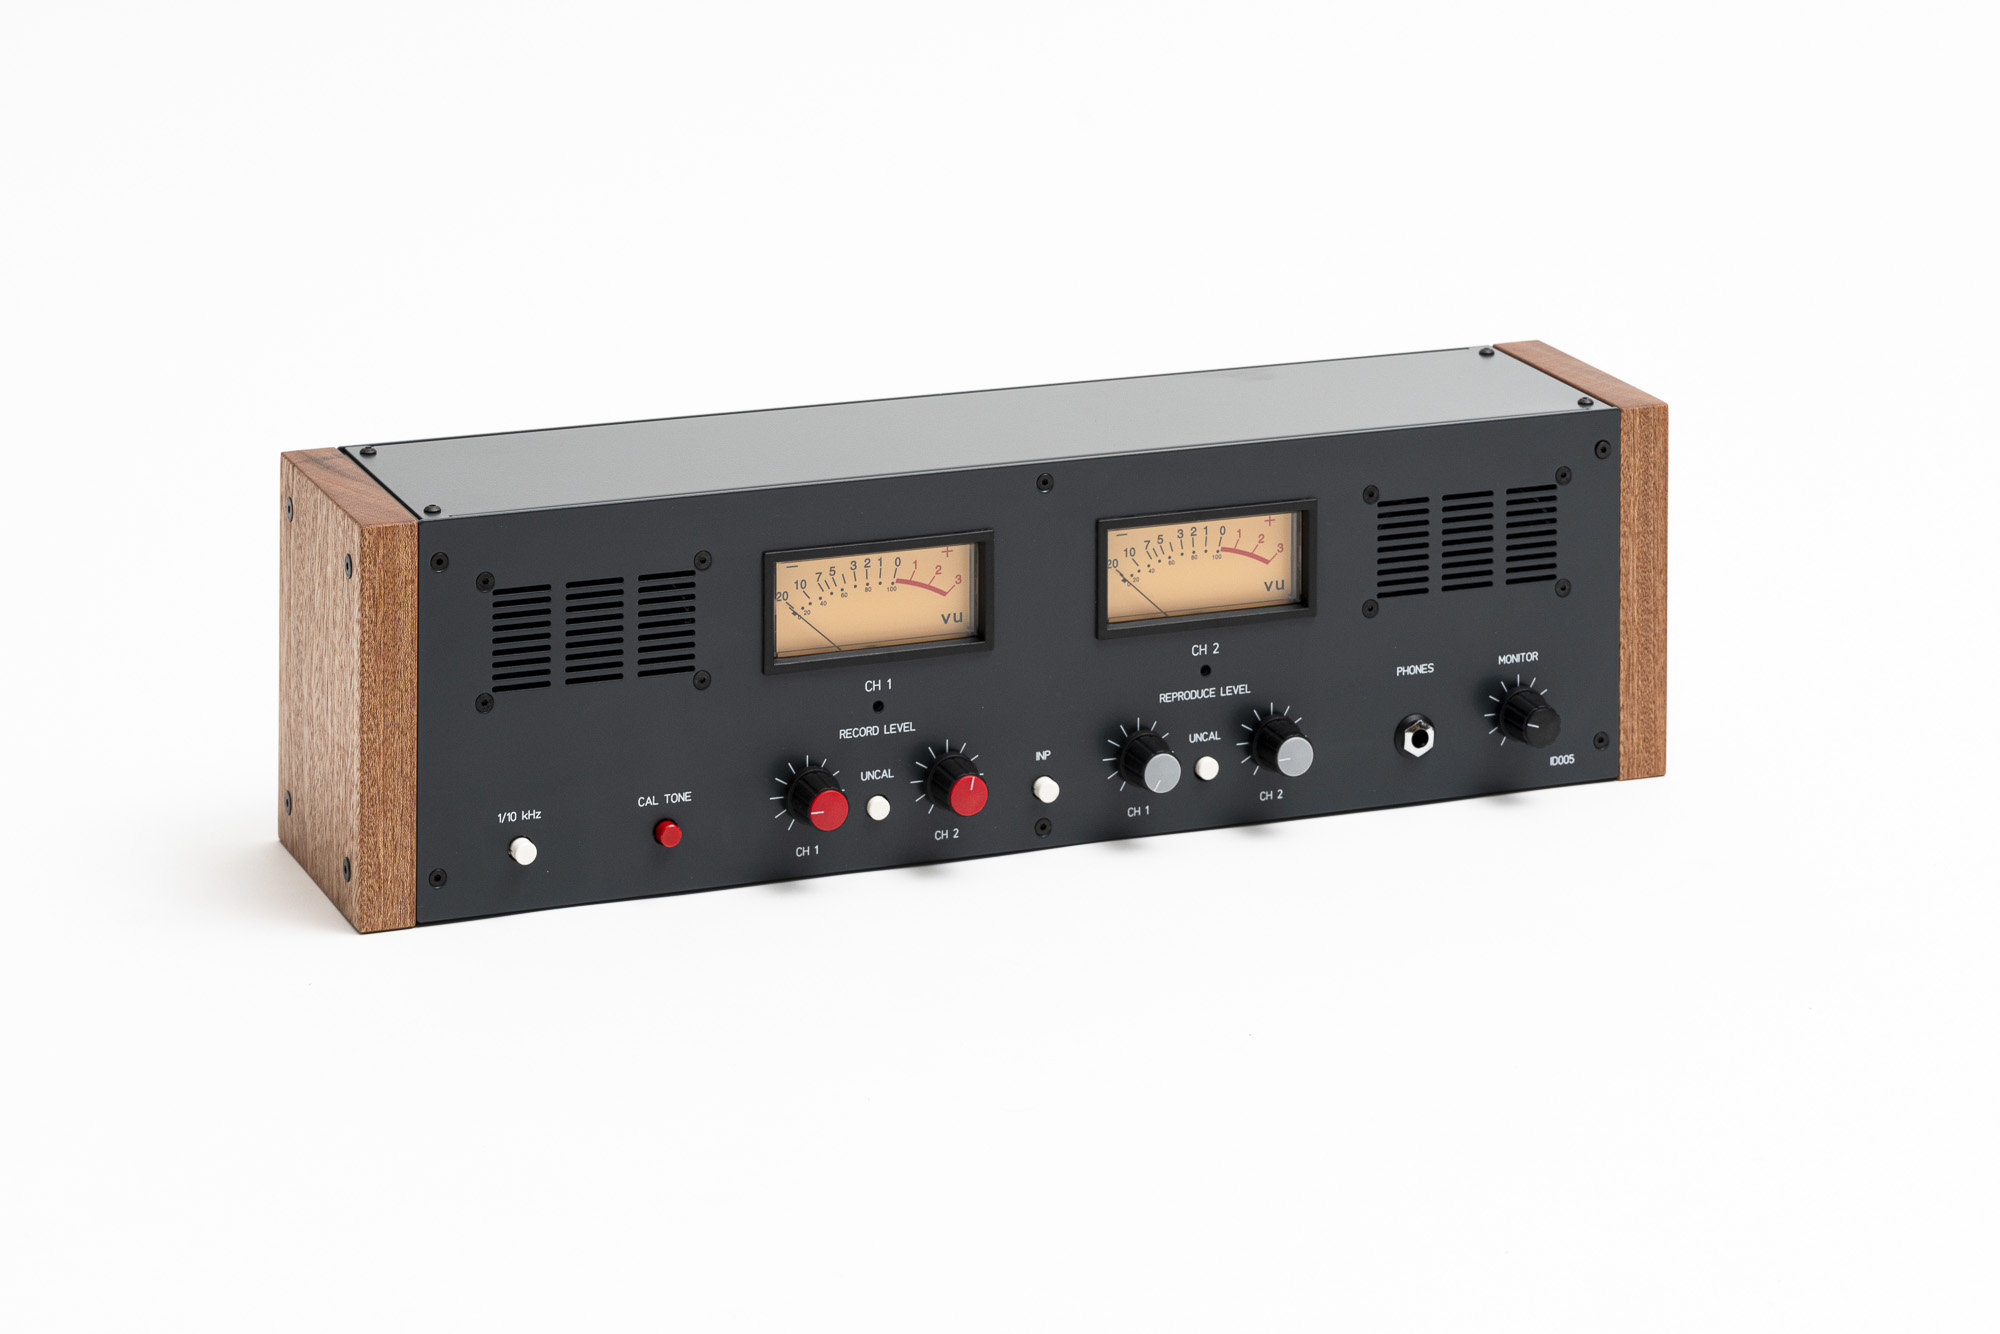 NEW VU Meter Bridge Unit for Studer A807, A810, A67, B67, C37 or any Other Reel To Reel Tape Recorder